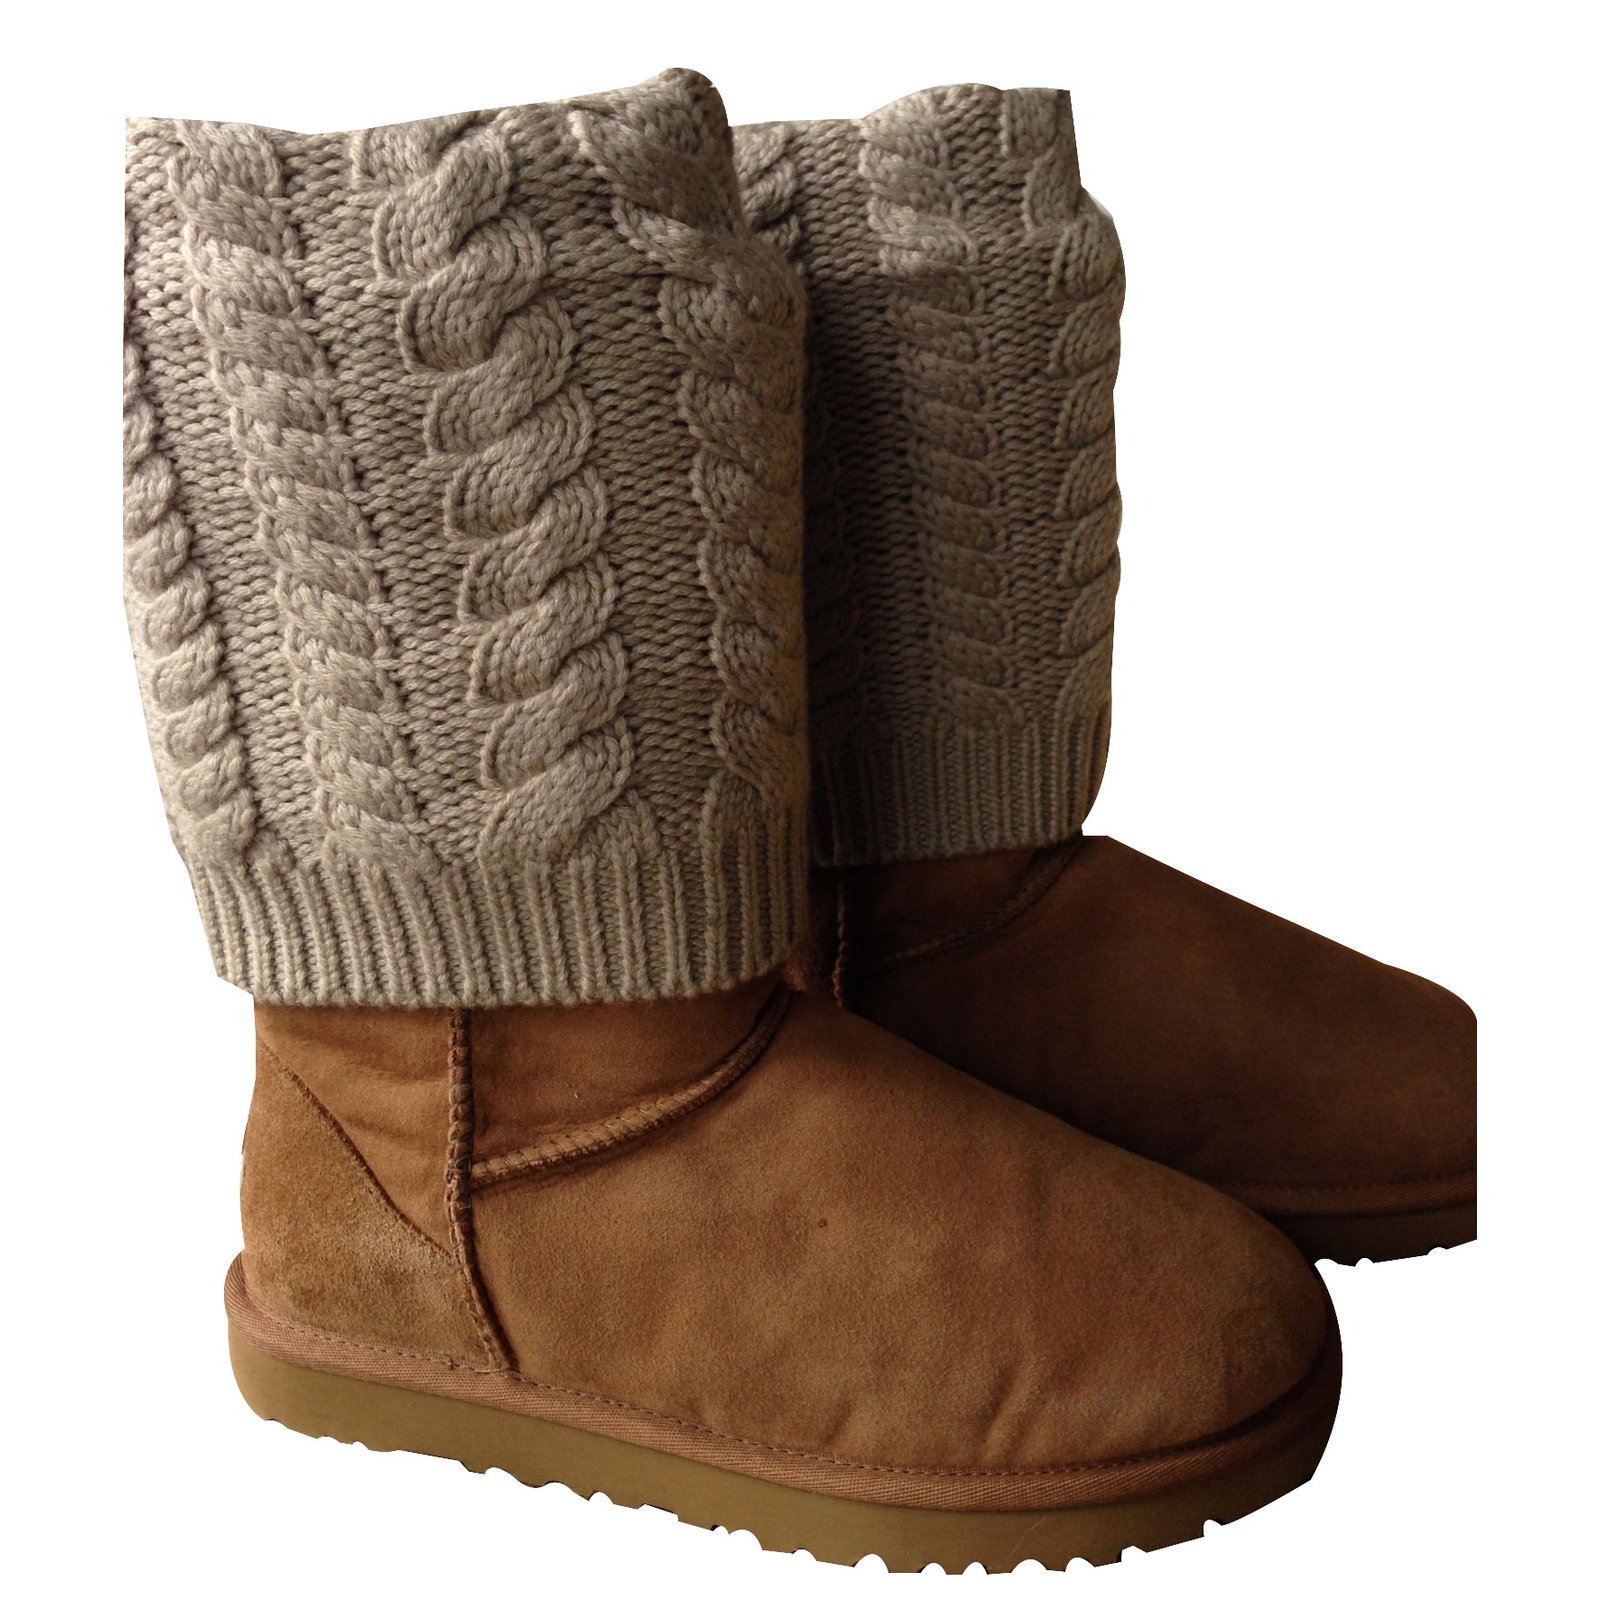 Ugg UGG SPECIAL EDITION Boots Leather 